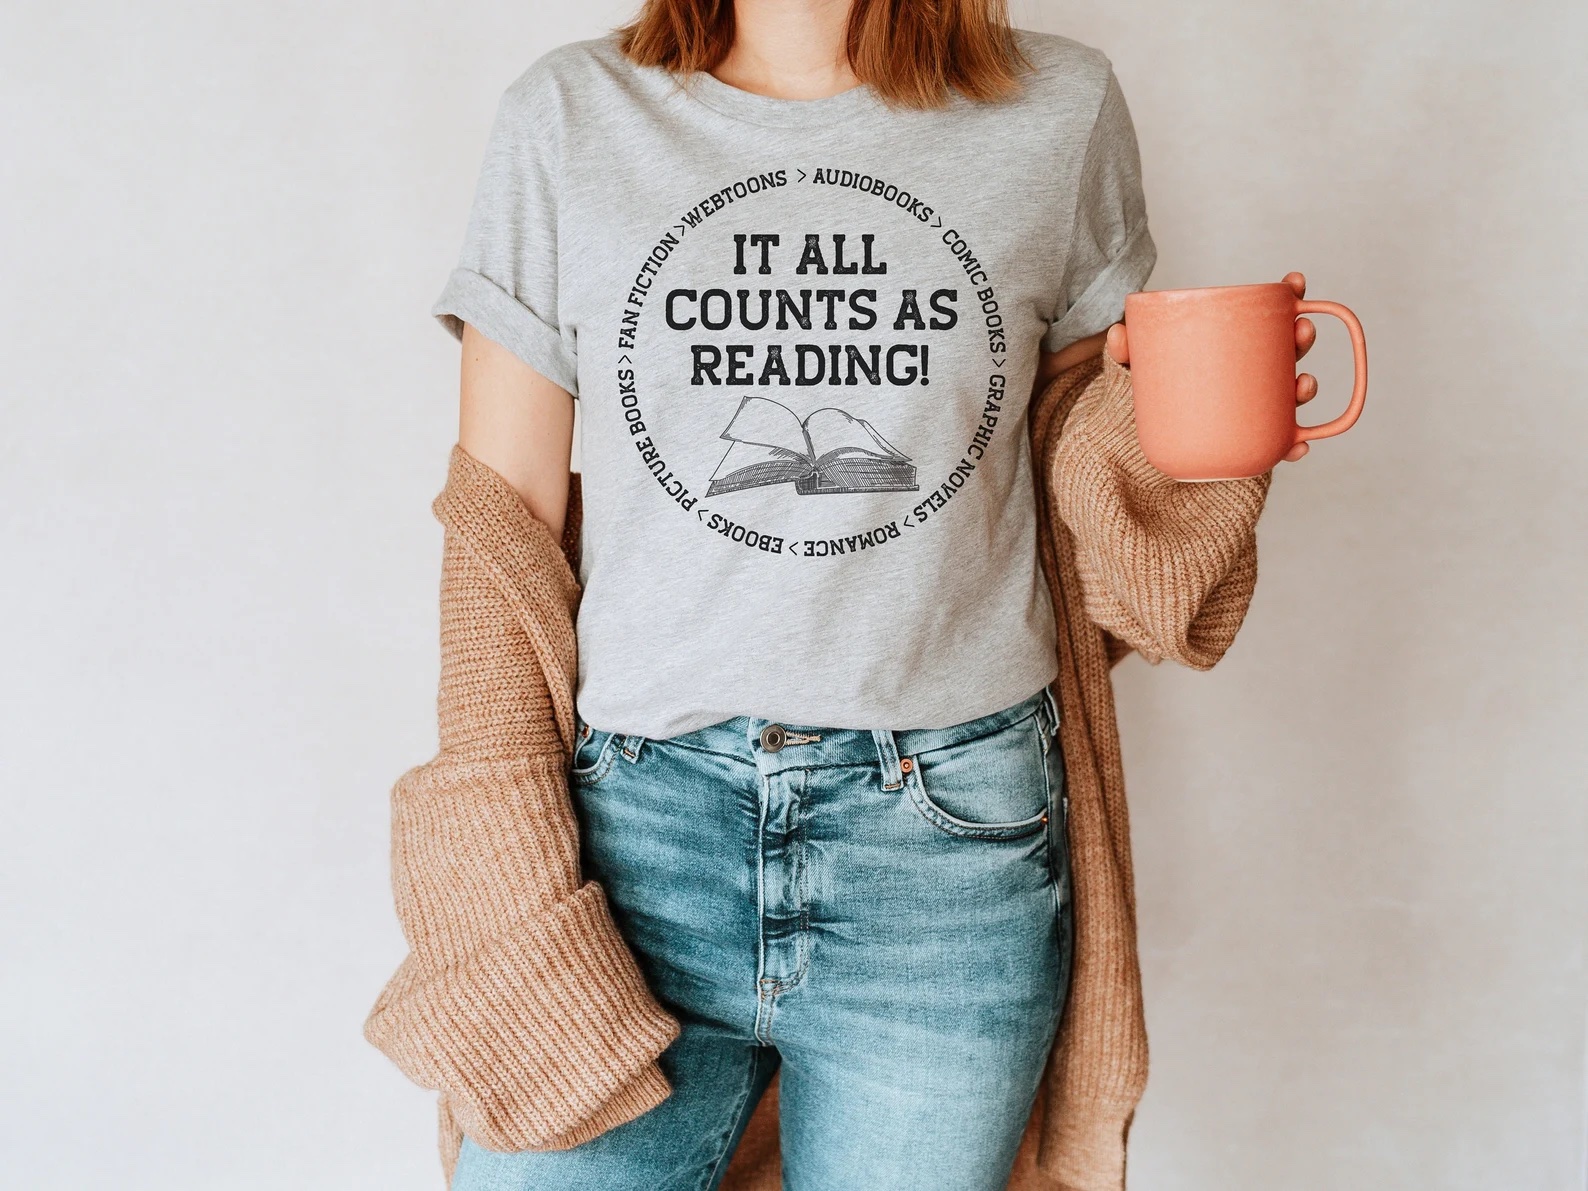 A photo of a white person wearing a gray t-shirt that says, "It All Counts As Reading!"